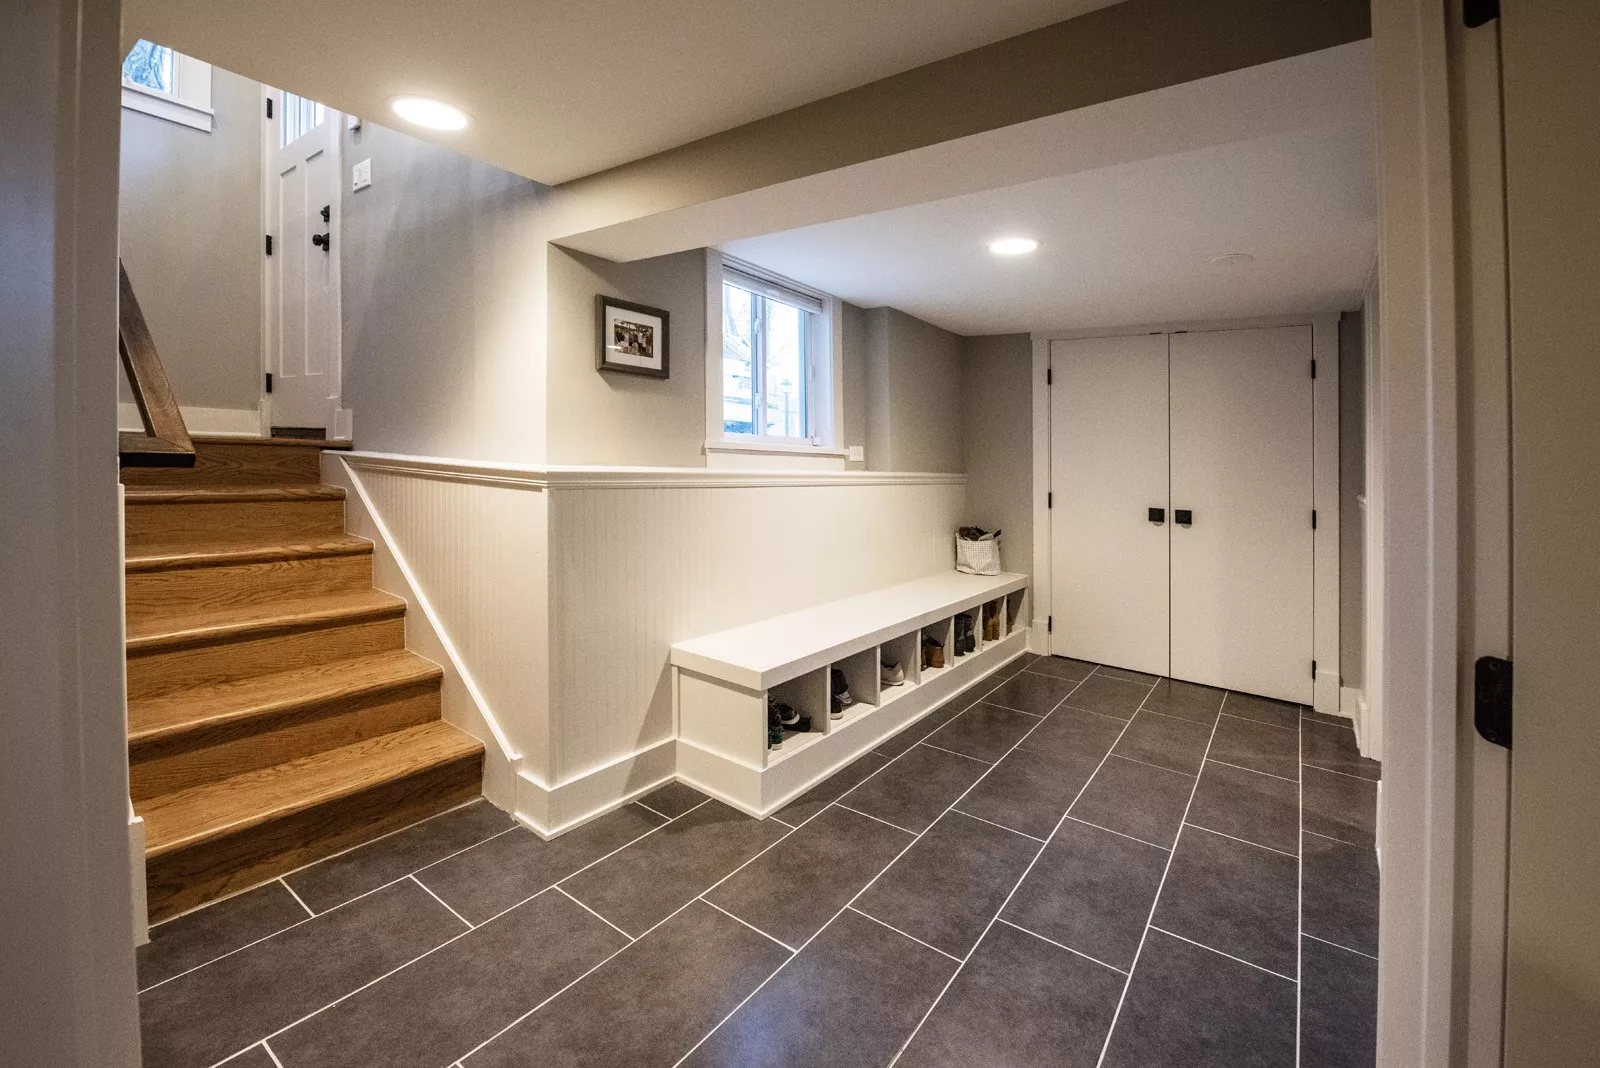 Hallway leading from exterior doors with grey tiled floor & bench with shoes on shelves underneath